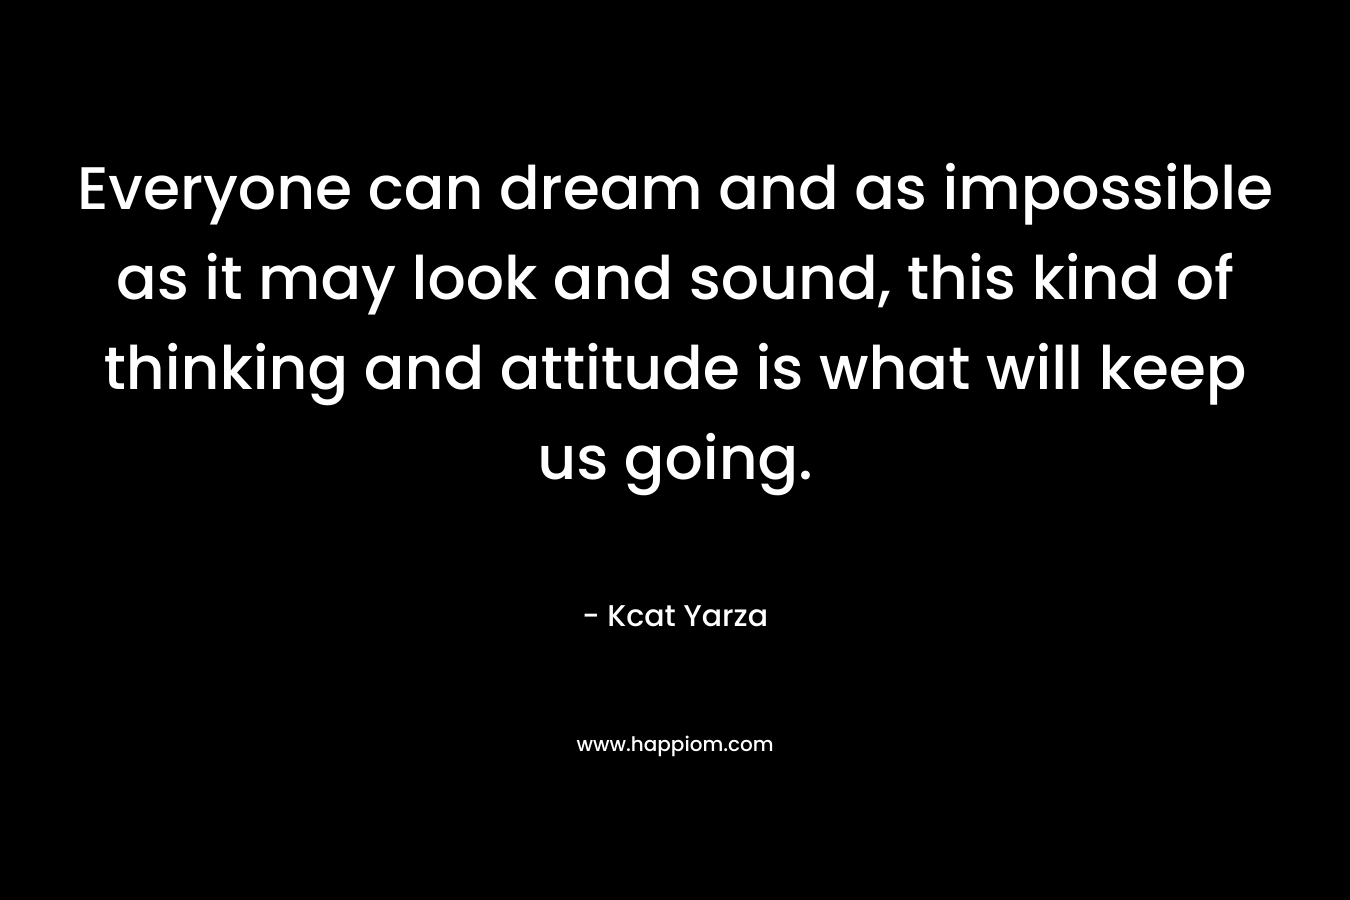 Everyone can dream and as impossible as it may look and sound, this kind of thinking and attitude is what will keep us going. – Kcat Yarza